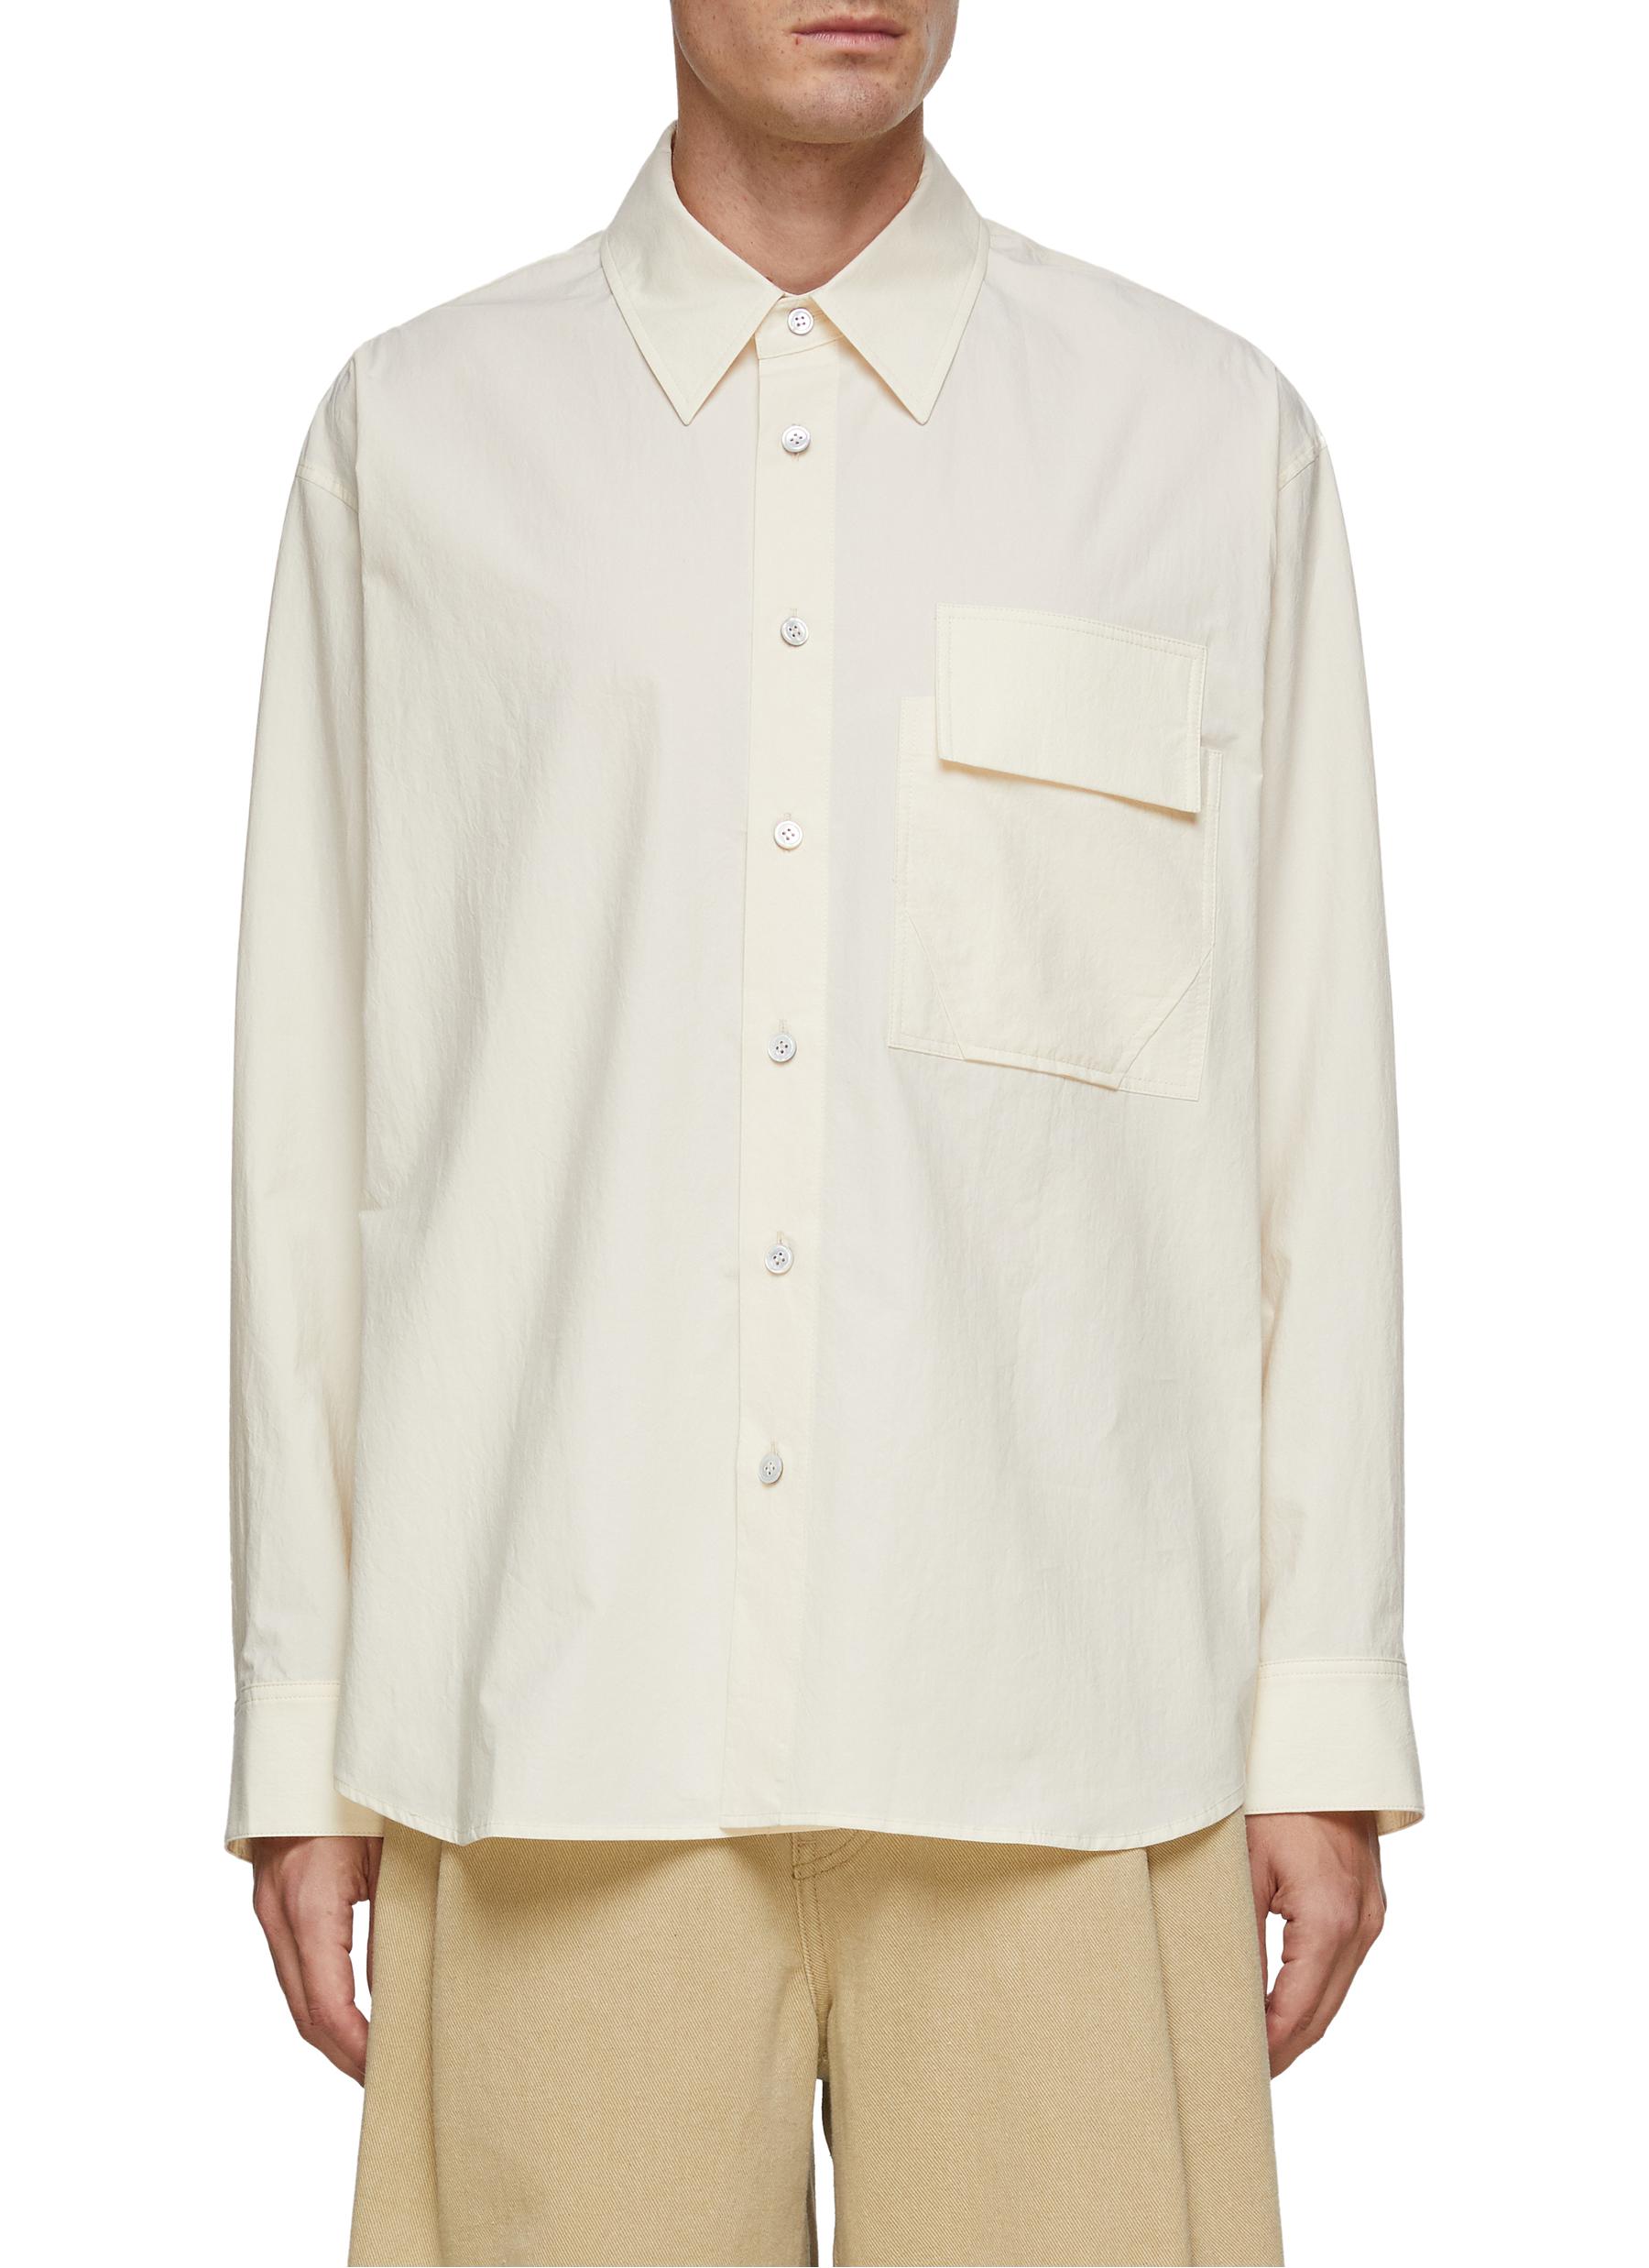 SOLID HOMME PATCH POCKET BUTTON UP SHIRT